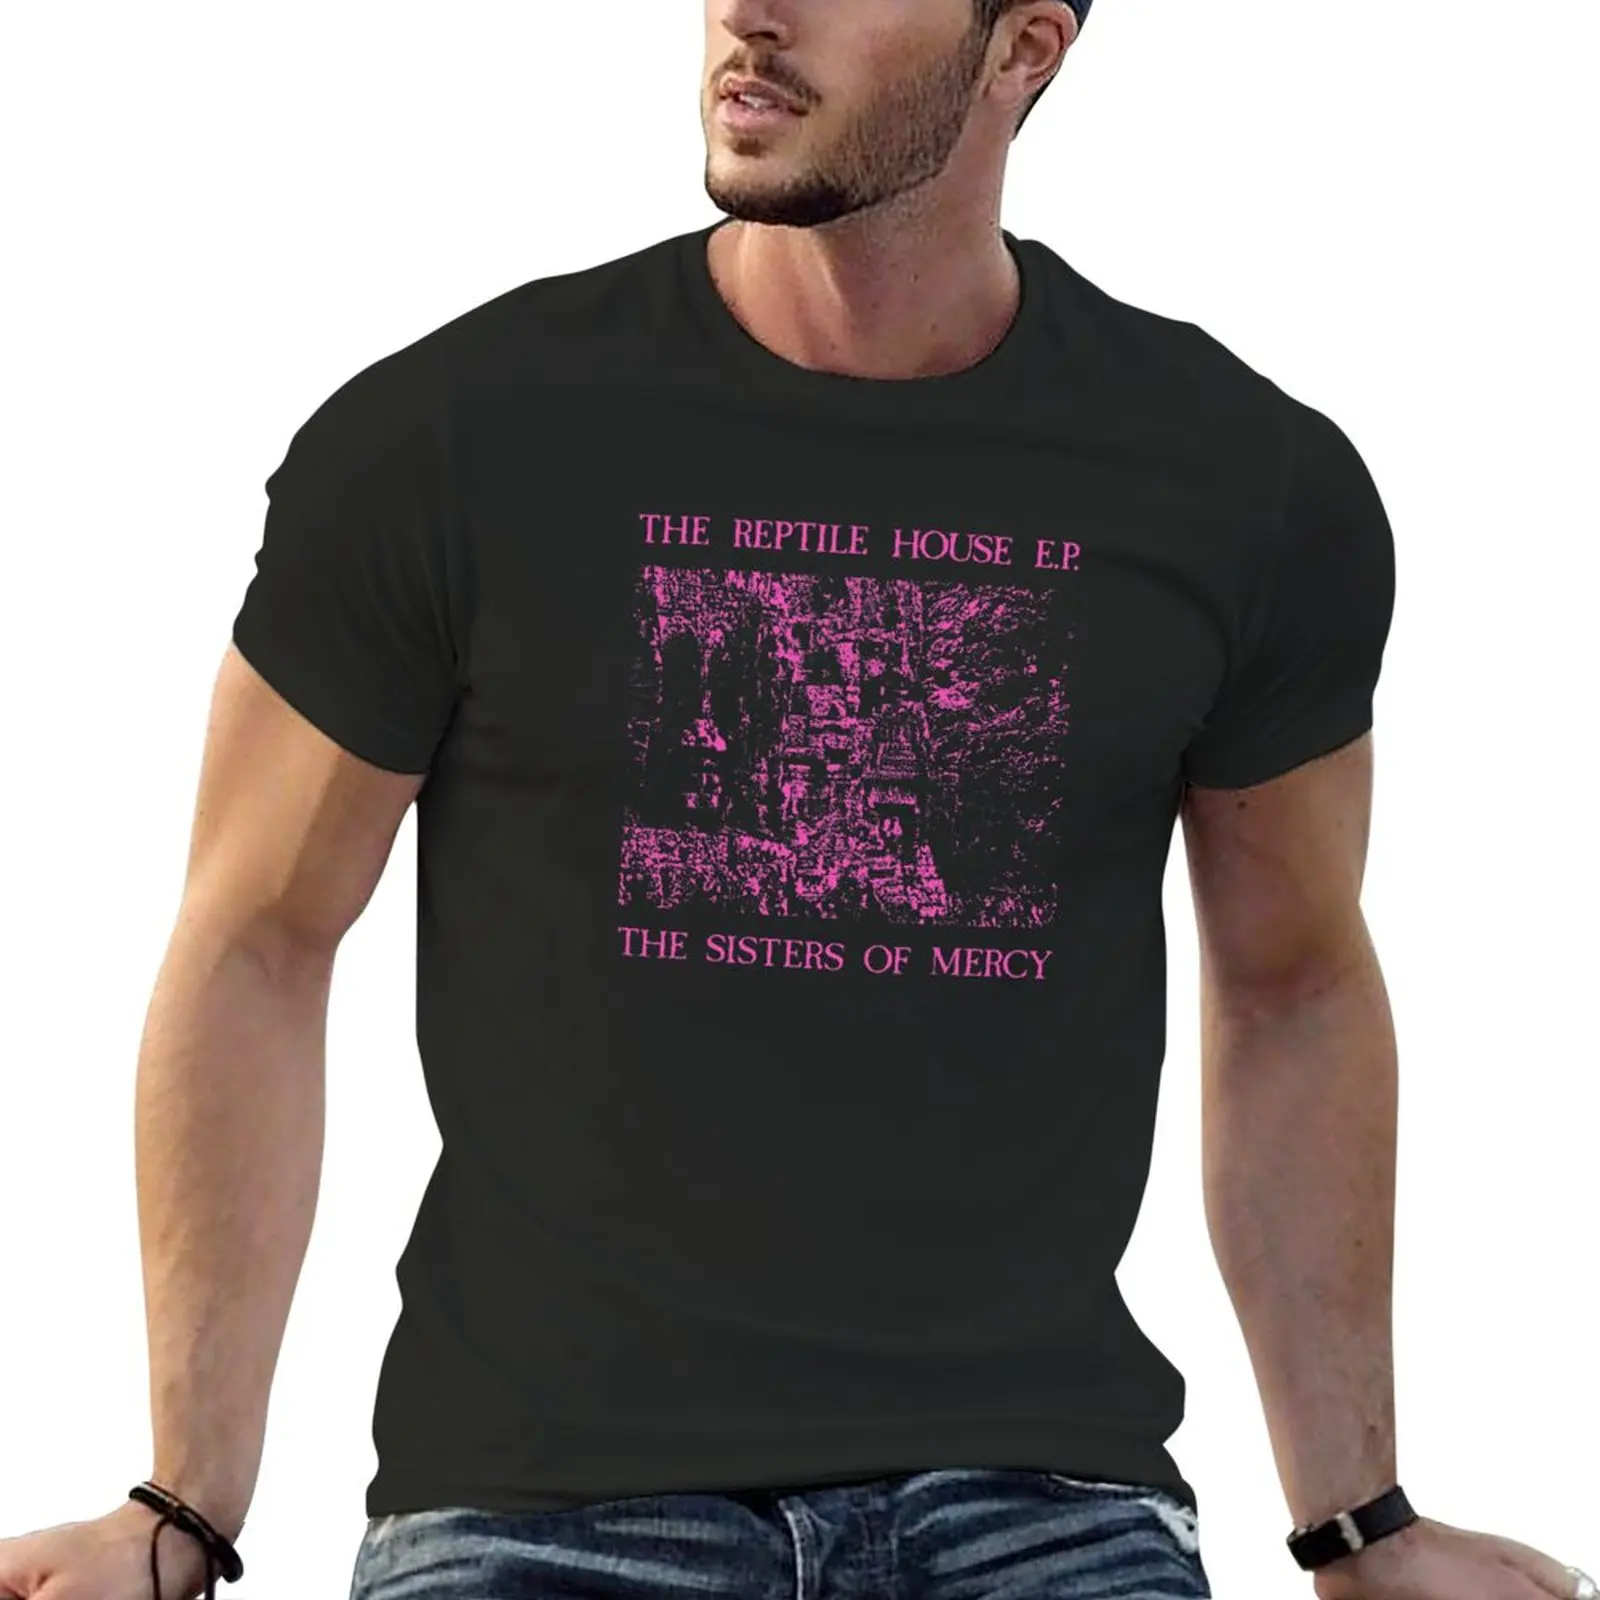 

New The Reptile House E.P. - The Sisters of Mercy - Goth - Gothic T-Shirt Anime t-shirt Short sleeve tee black t-shirts for men